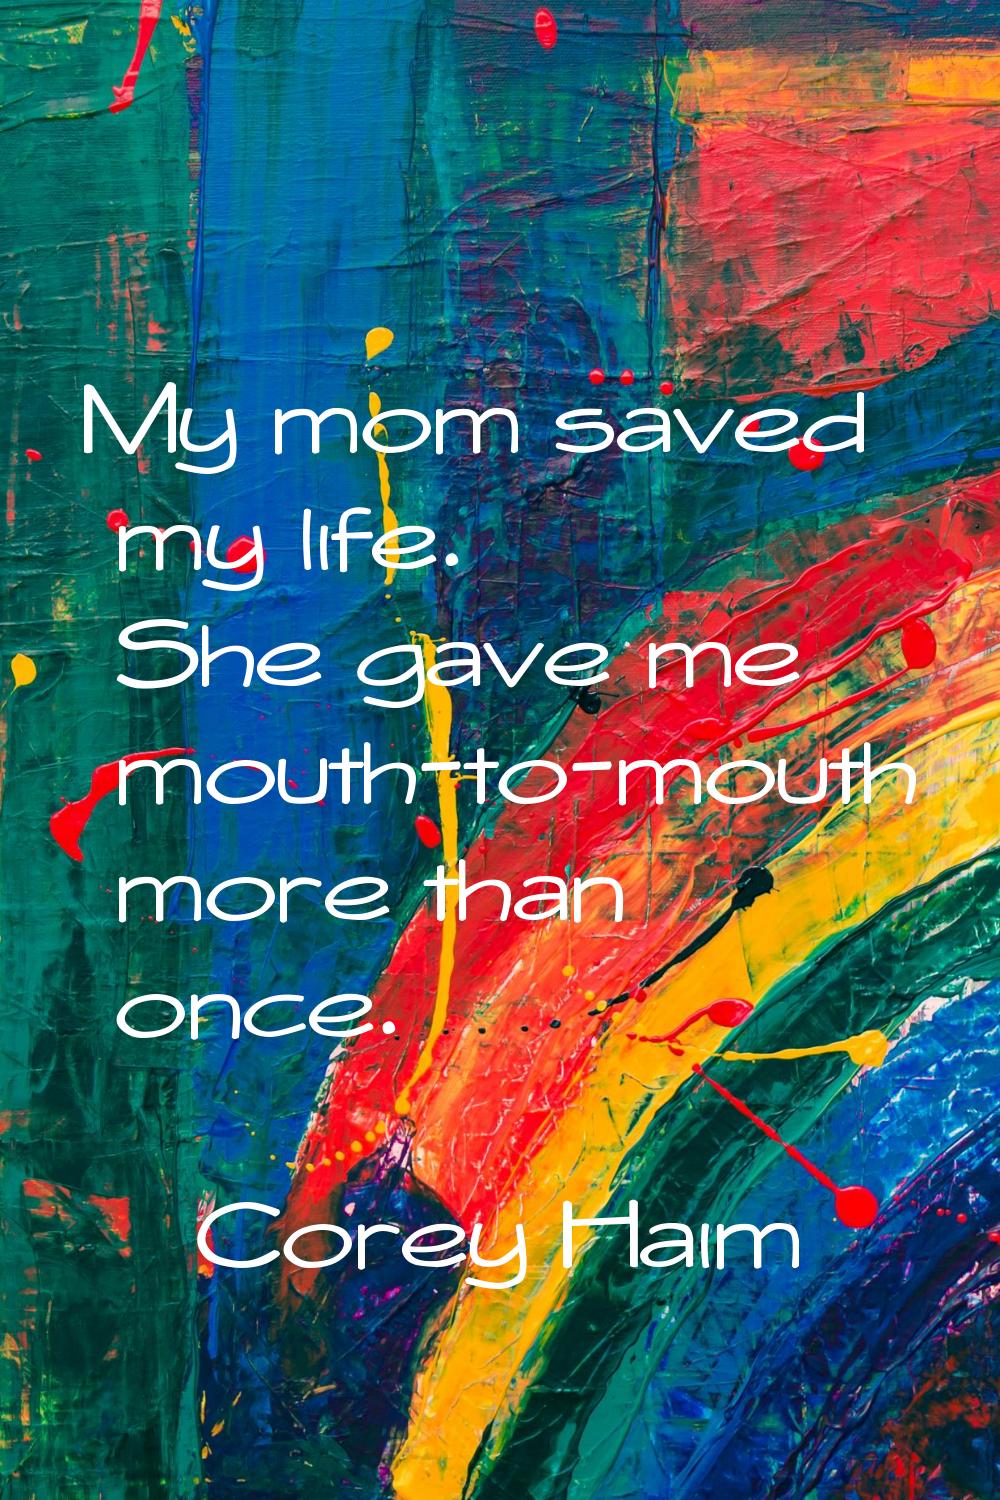 My mom saved my life. She gave me mouth-to-mouth more than once.